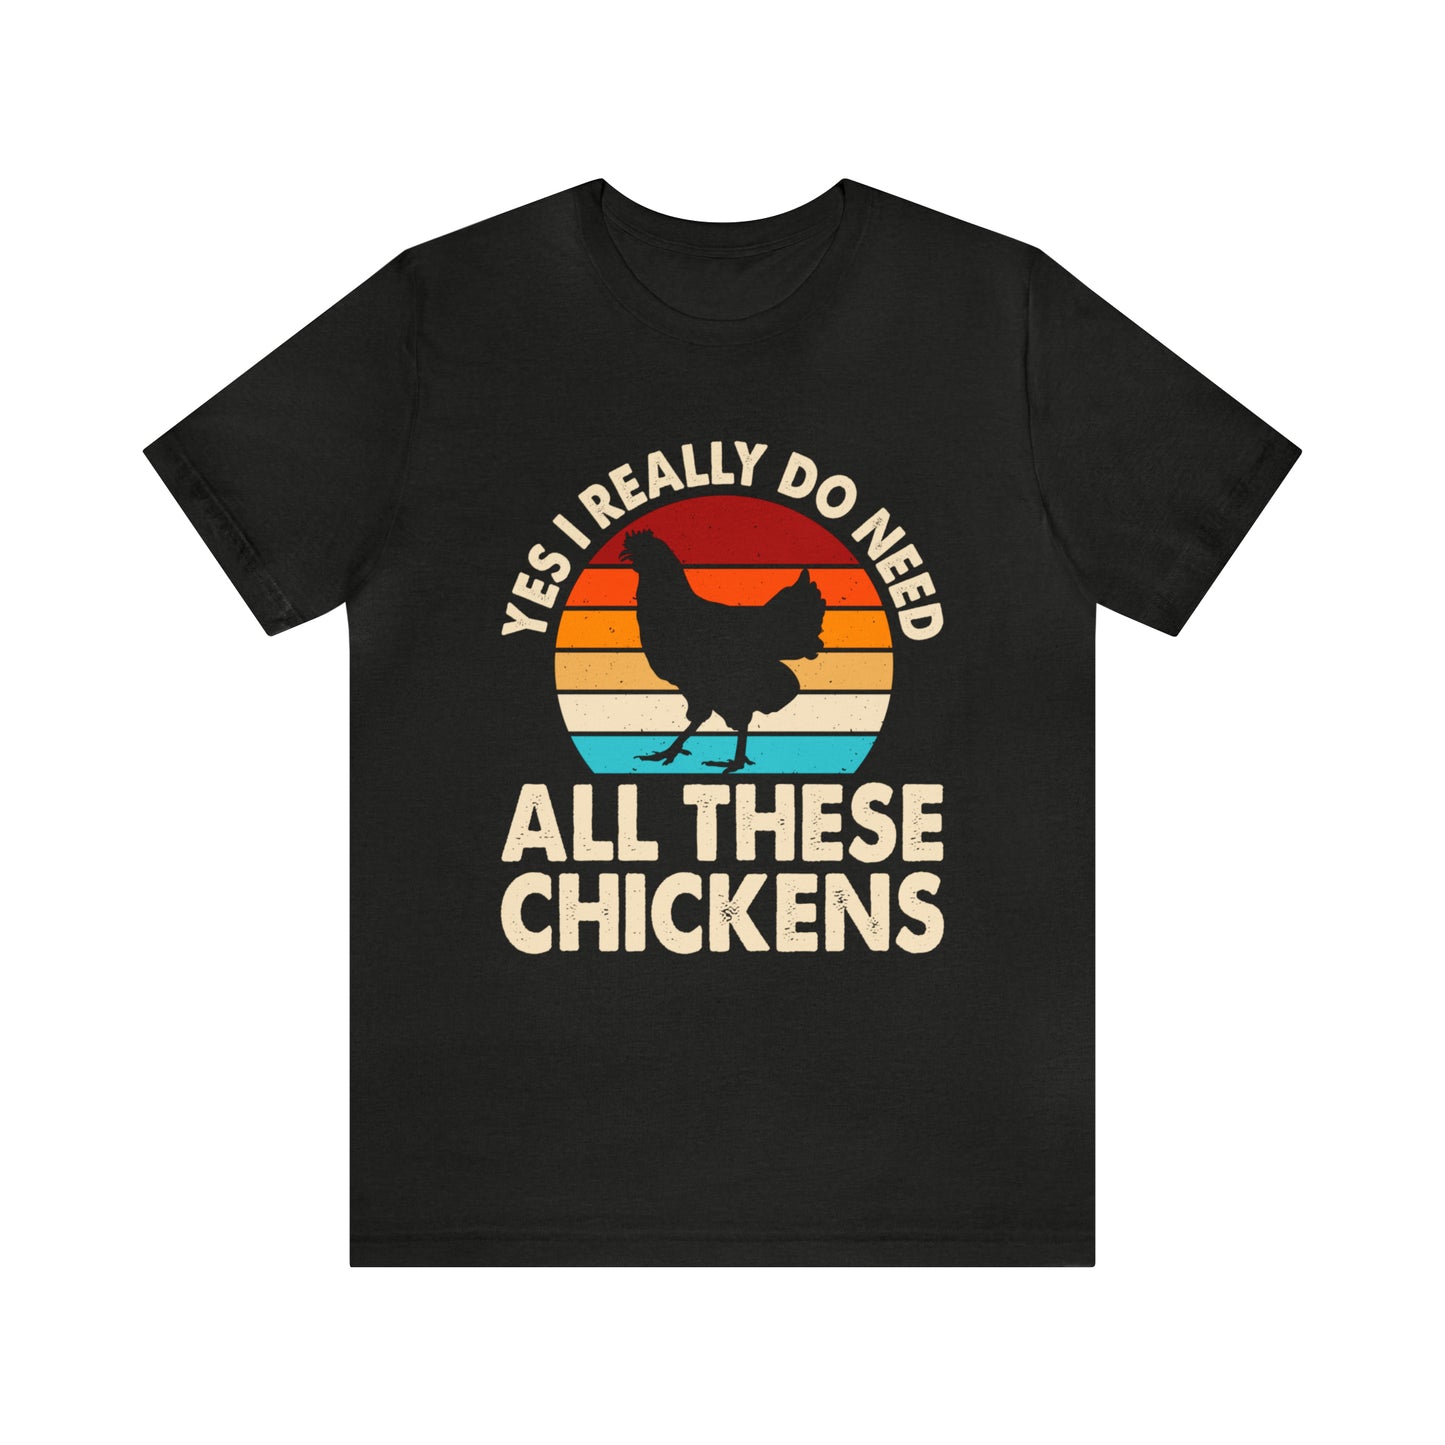 Yes, I Really Do Need All These Chickens T-Shirt - Chicken Shirt, Chicken Mom Tee, Retro Charm and Timeless Style